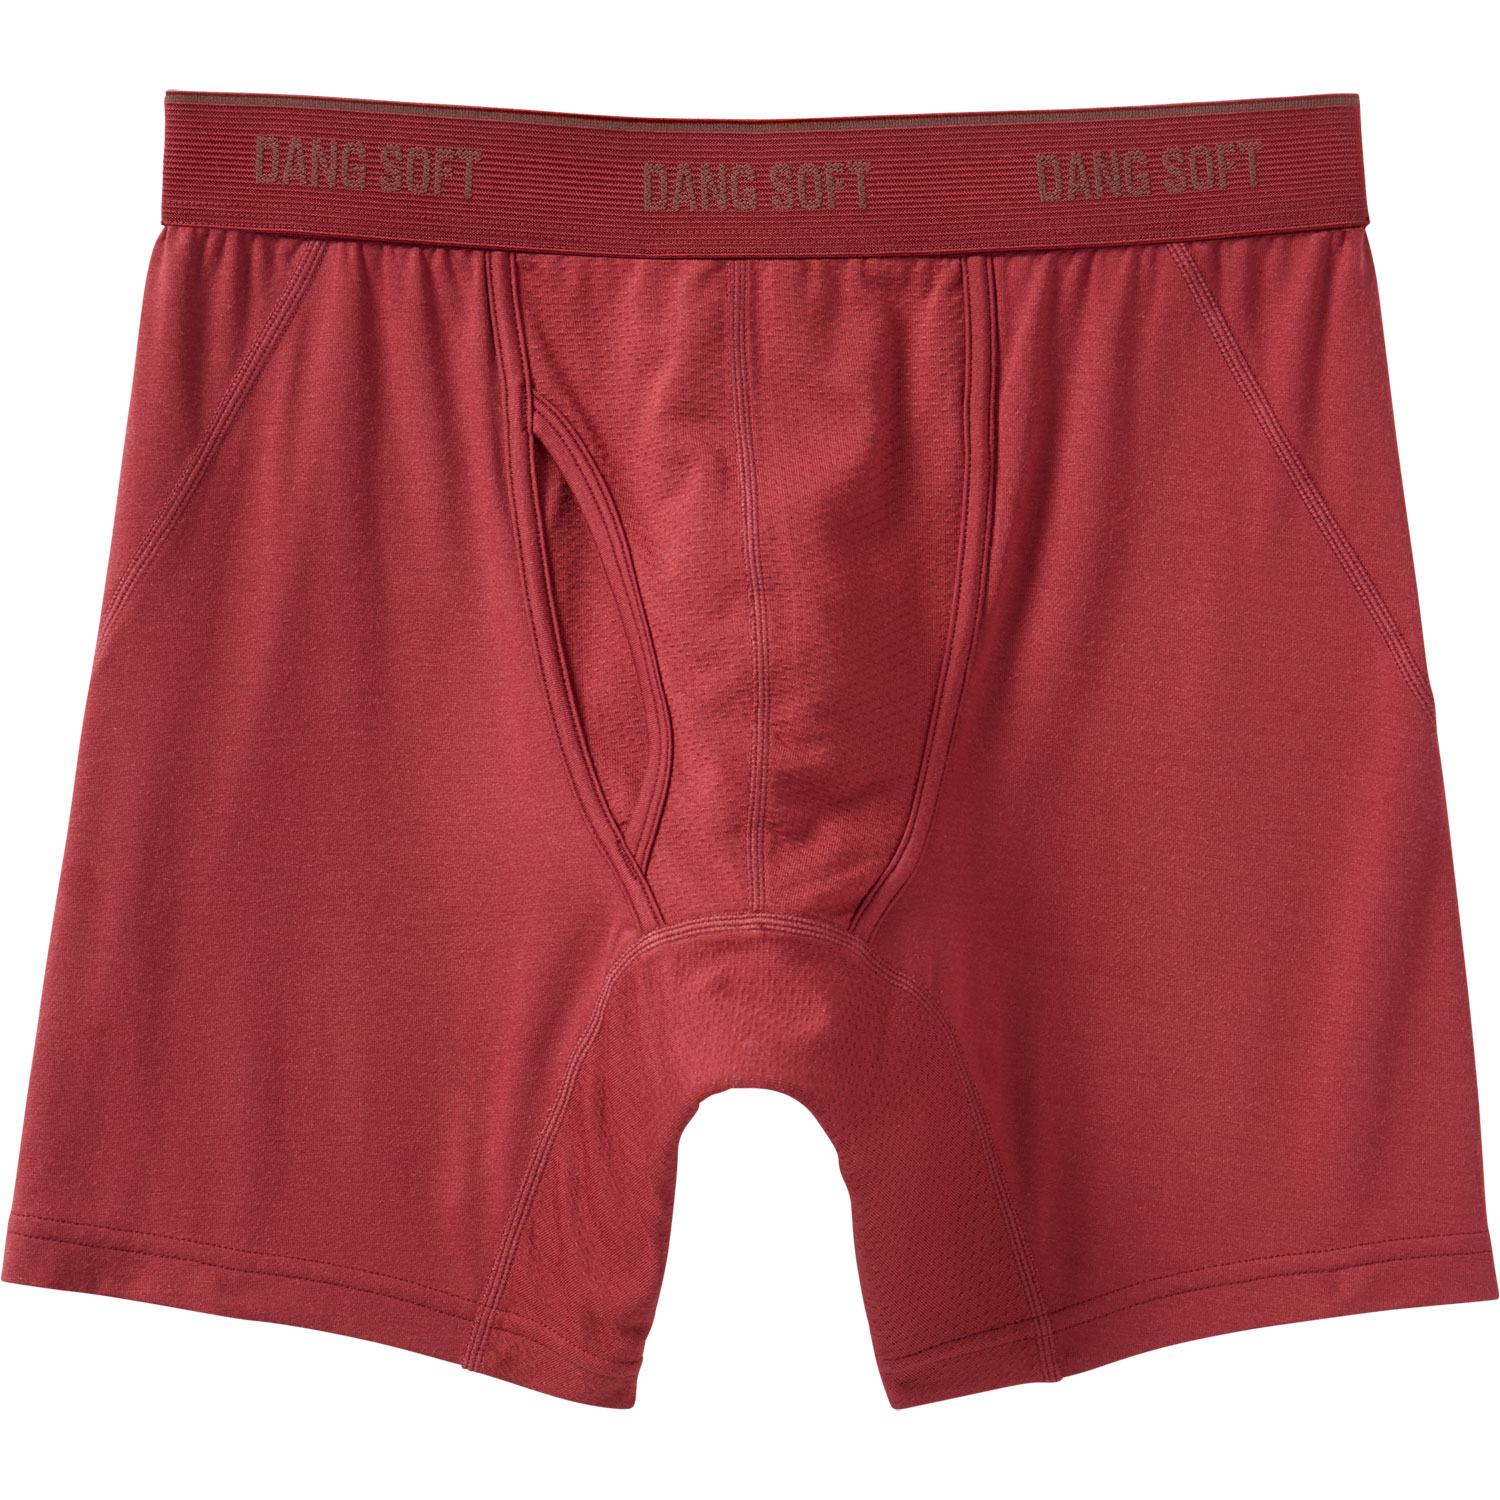 Men's Dang Soft Boxer Briefs | Duluth Trading Company